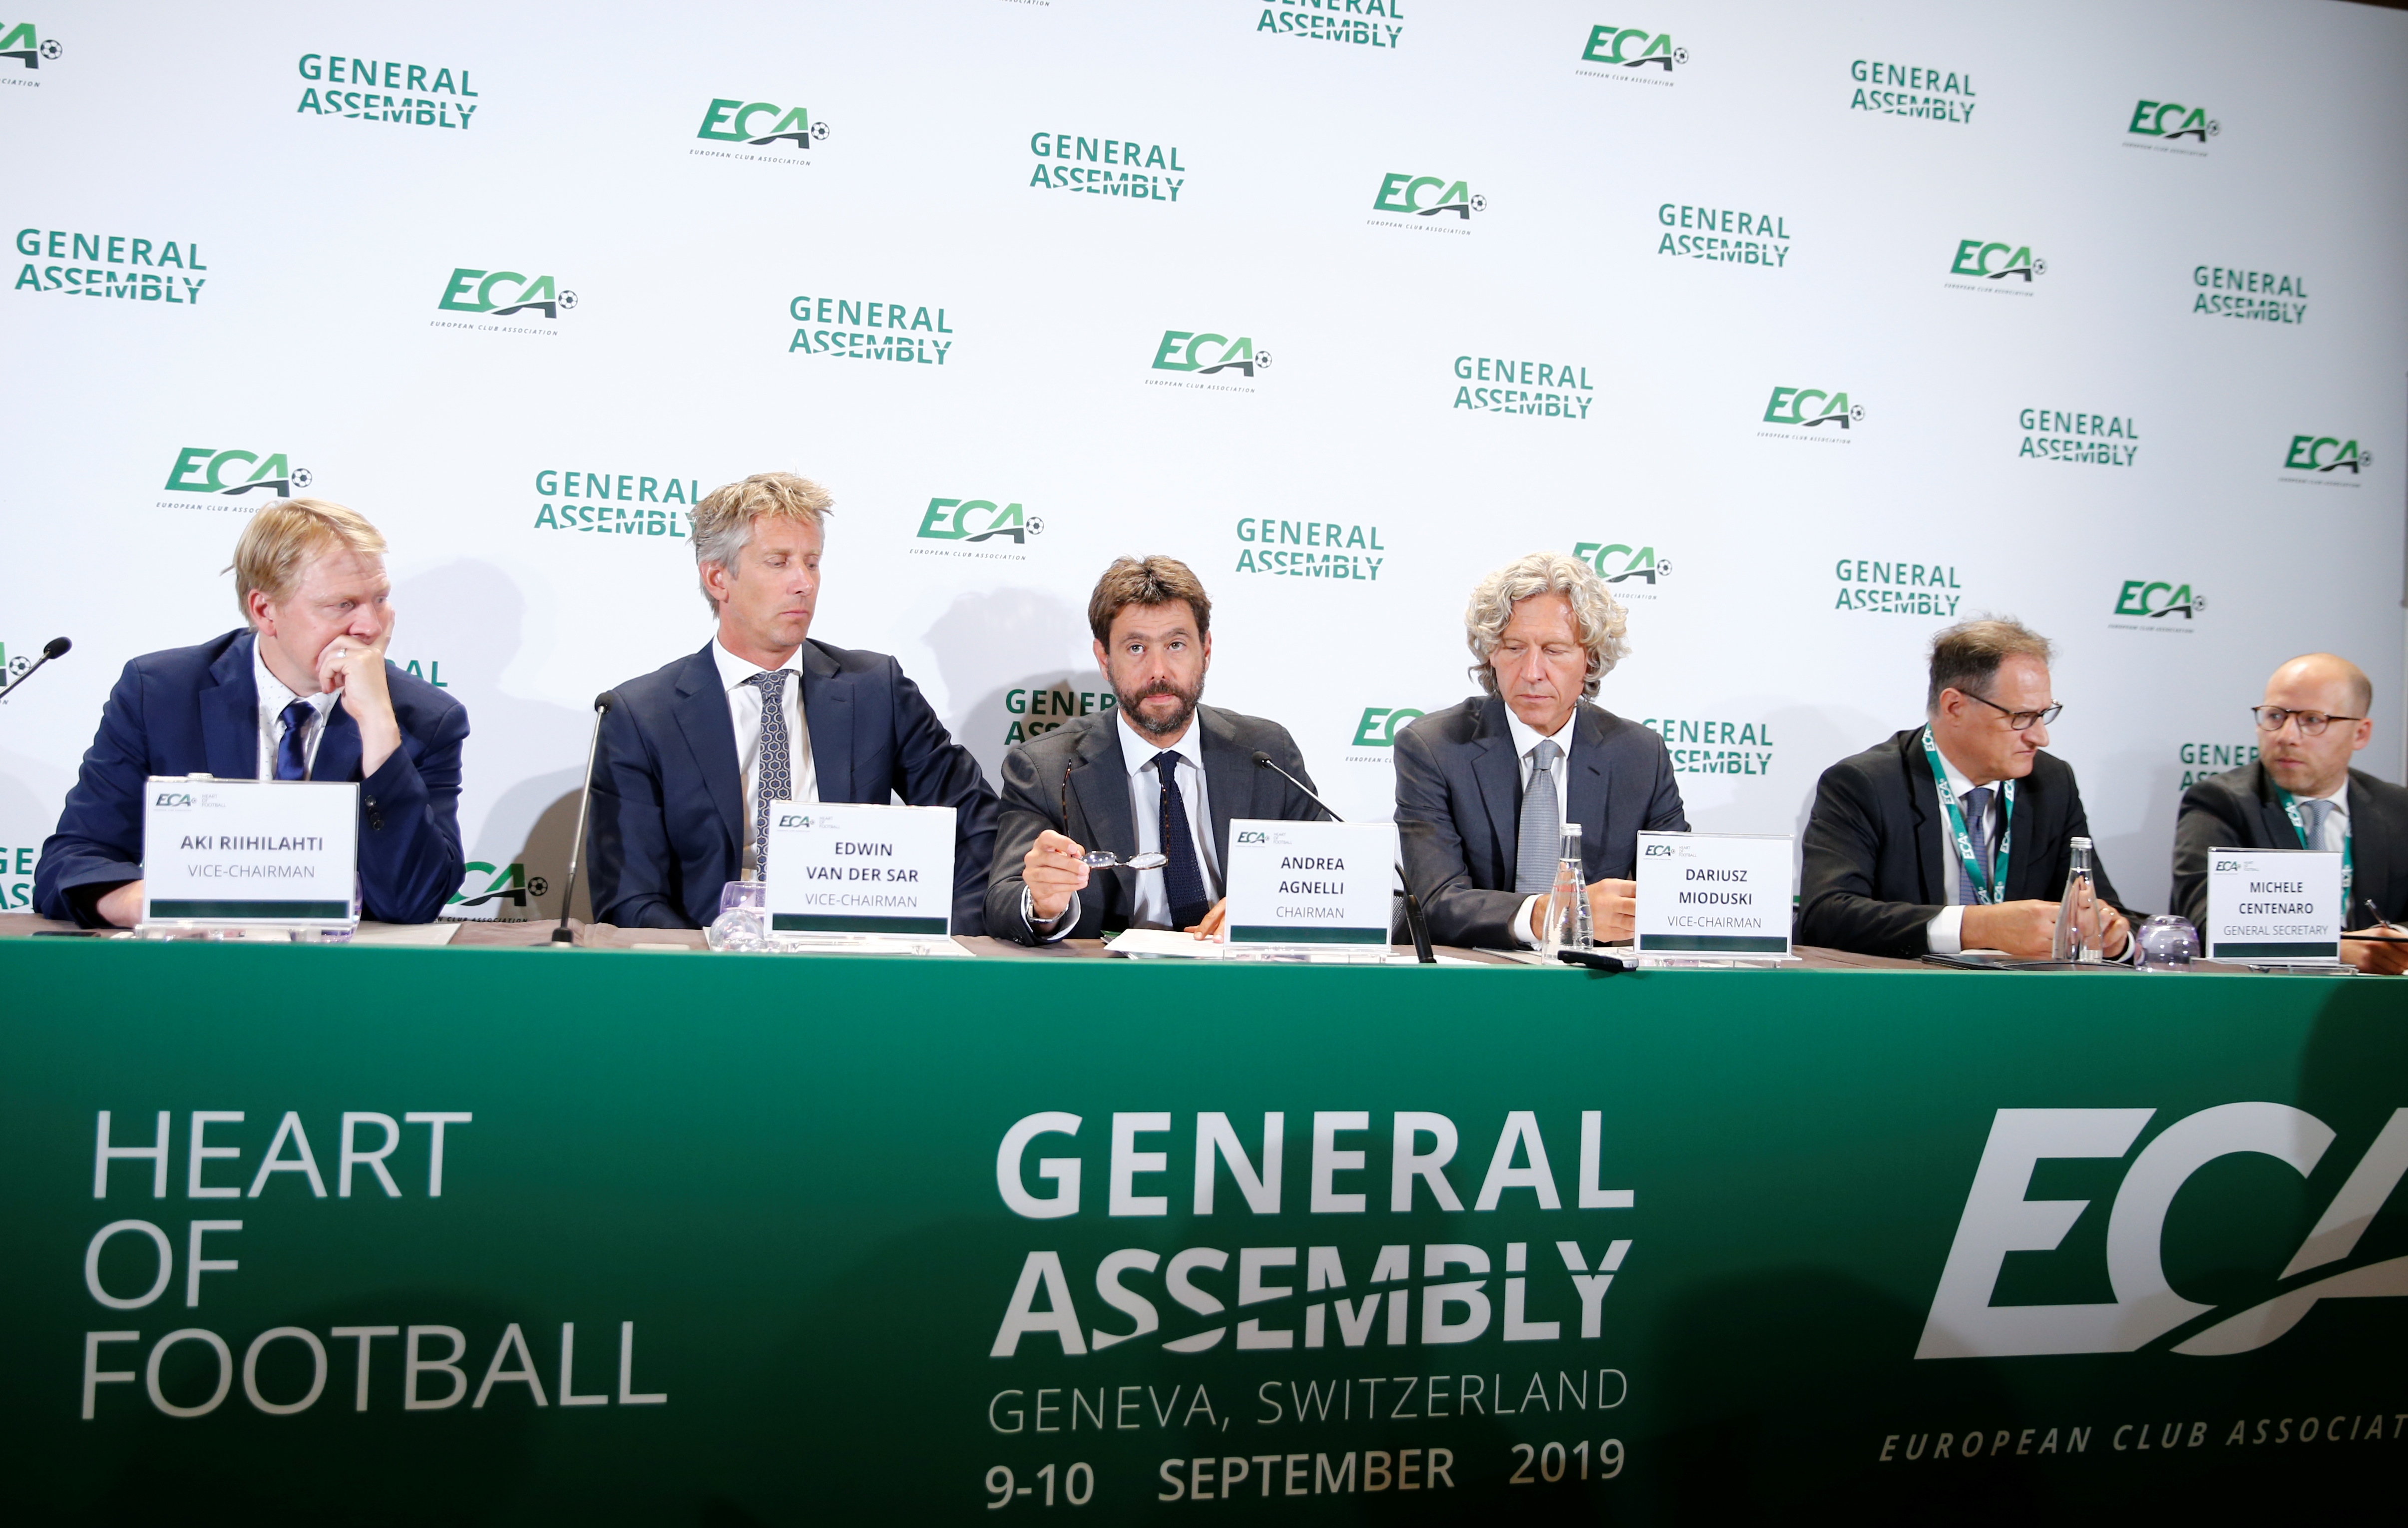 European Club Association (ECA) Chairman Andrea Agnelli and other ECA representatives hold news briefing after the 23rd ECA General Assembly European Club Association (ECA) Chairman Andrea Agnelli and other ECA representatives hold news briefing after the 23rd ECA General Assembly in Geneva, Switzerland, September 10, 2019. REUTERS/Denis Balibouse DENIS BALIBOUSE